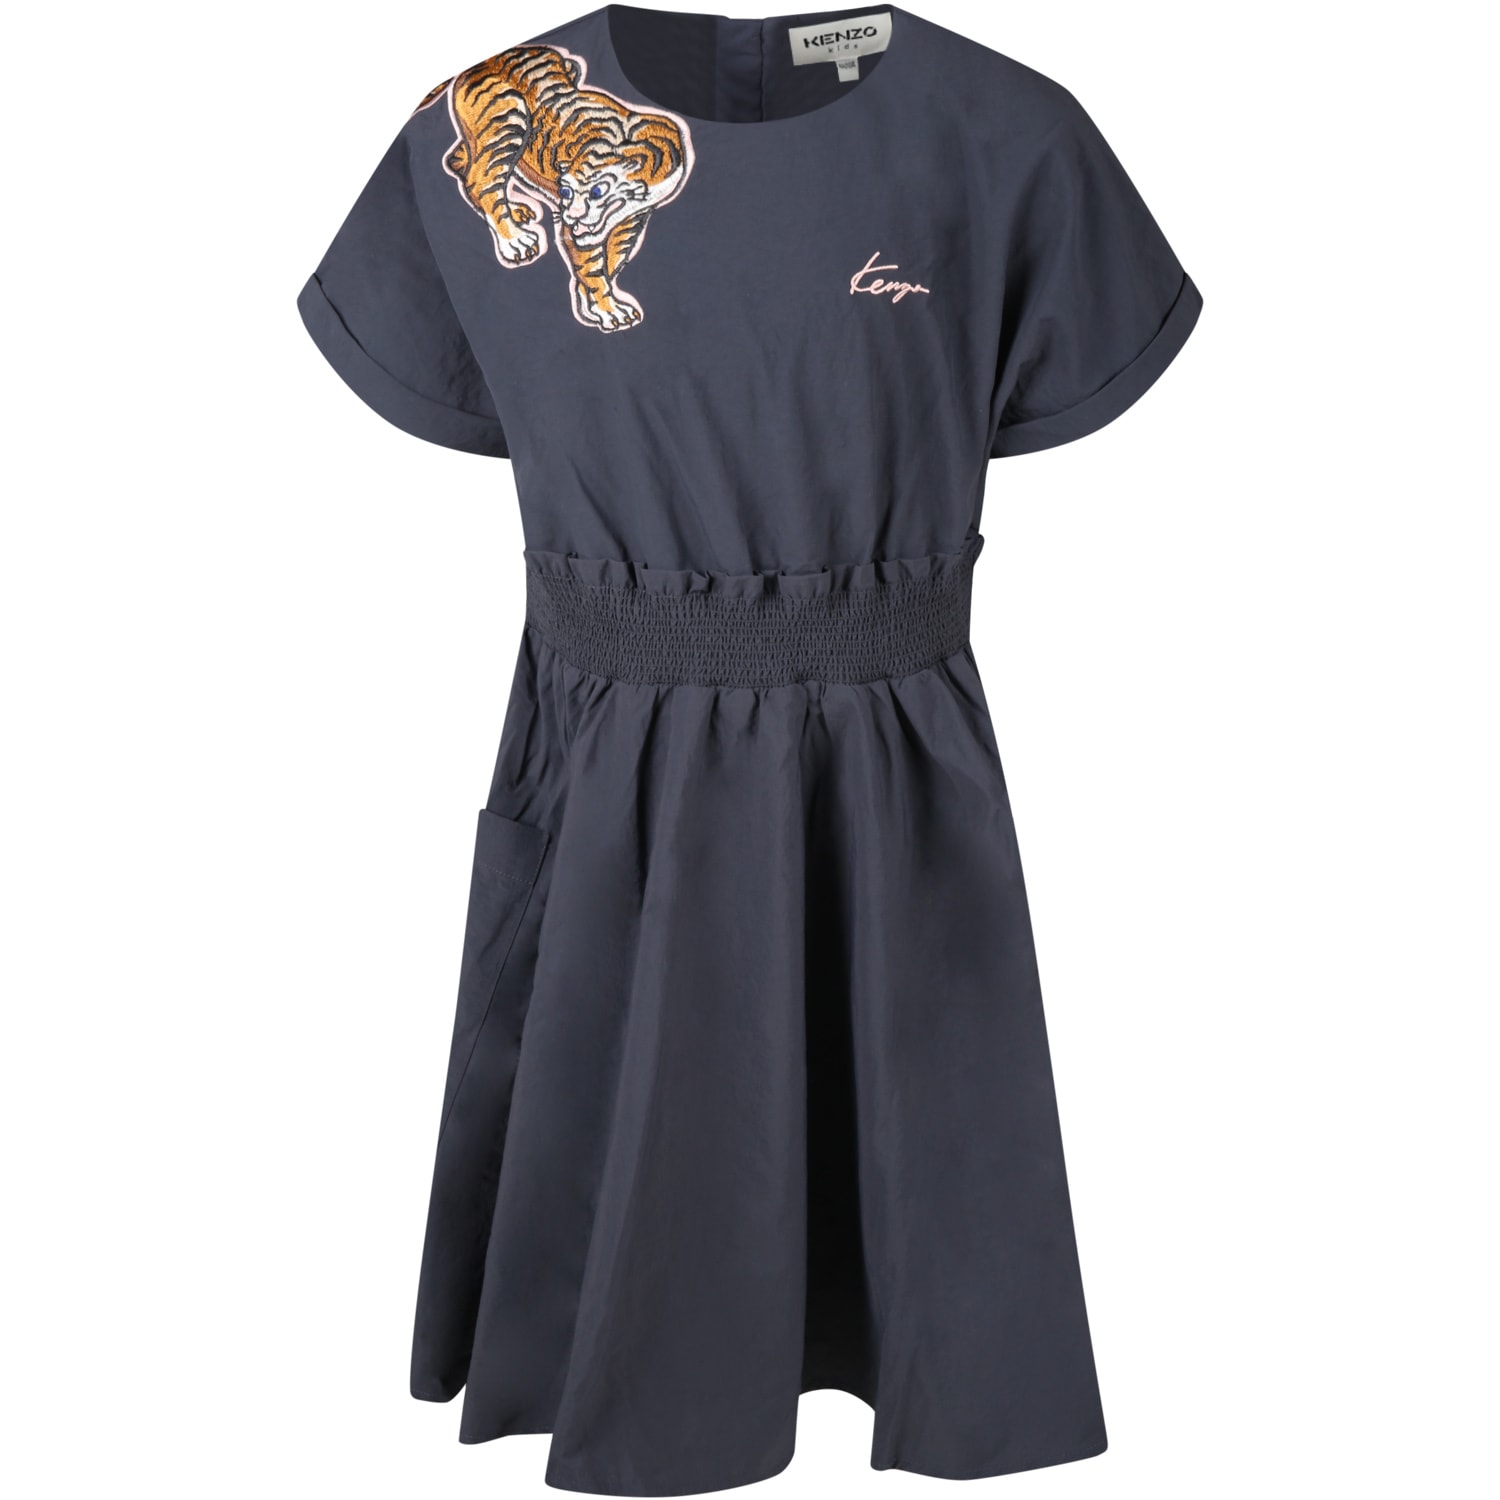 Kenzo Kids Grey Dress For Girl With Tiger